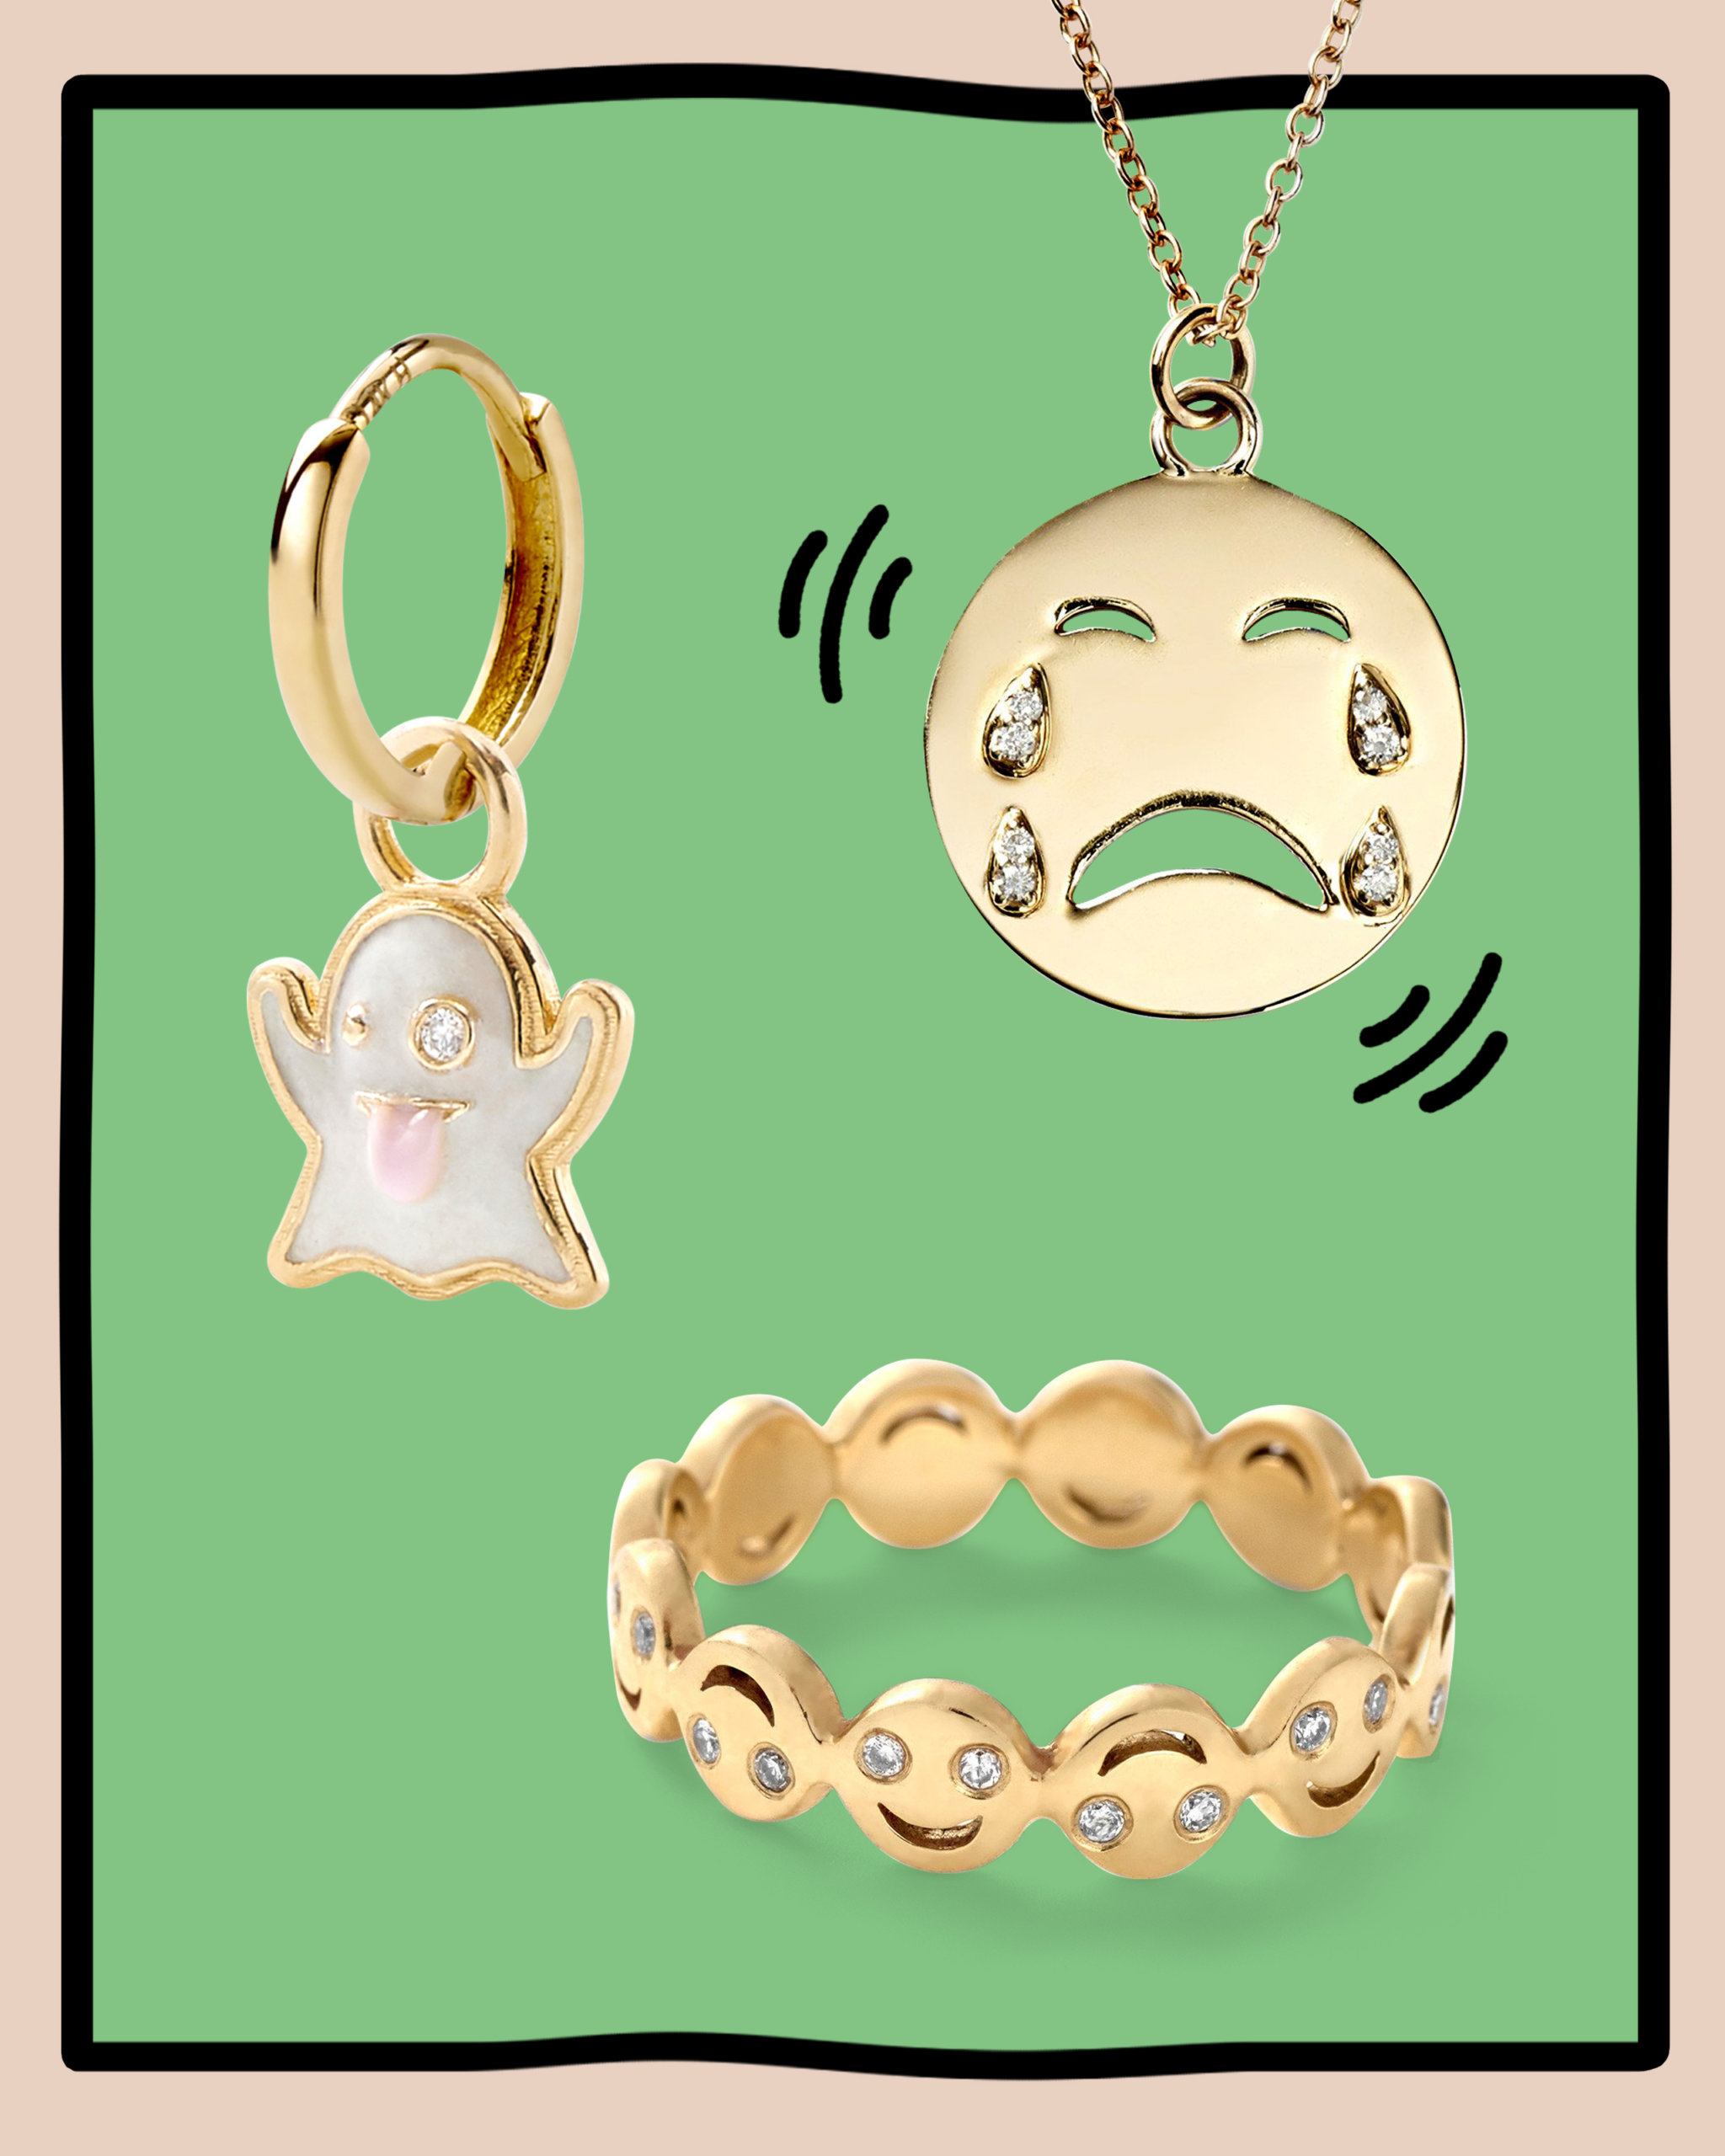 Round cut diamonds set within yellow gold ghost emoji earring, frowny face emoji necklace & smiley face emoji ring from Alison Lou 